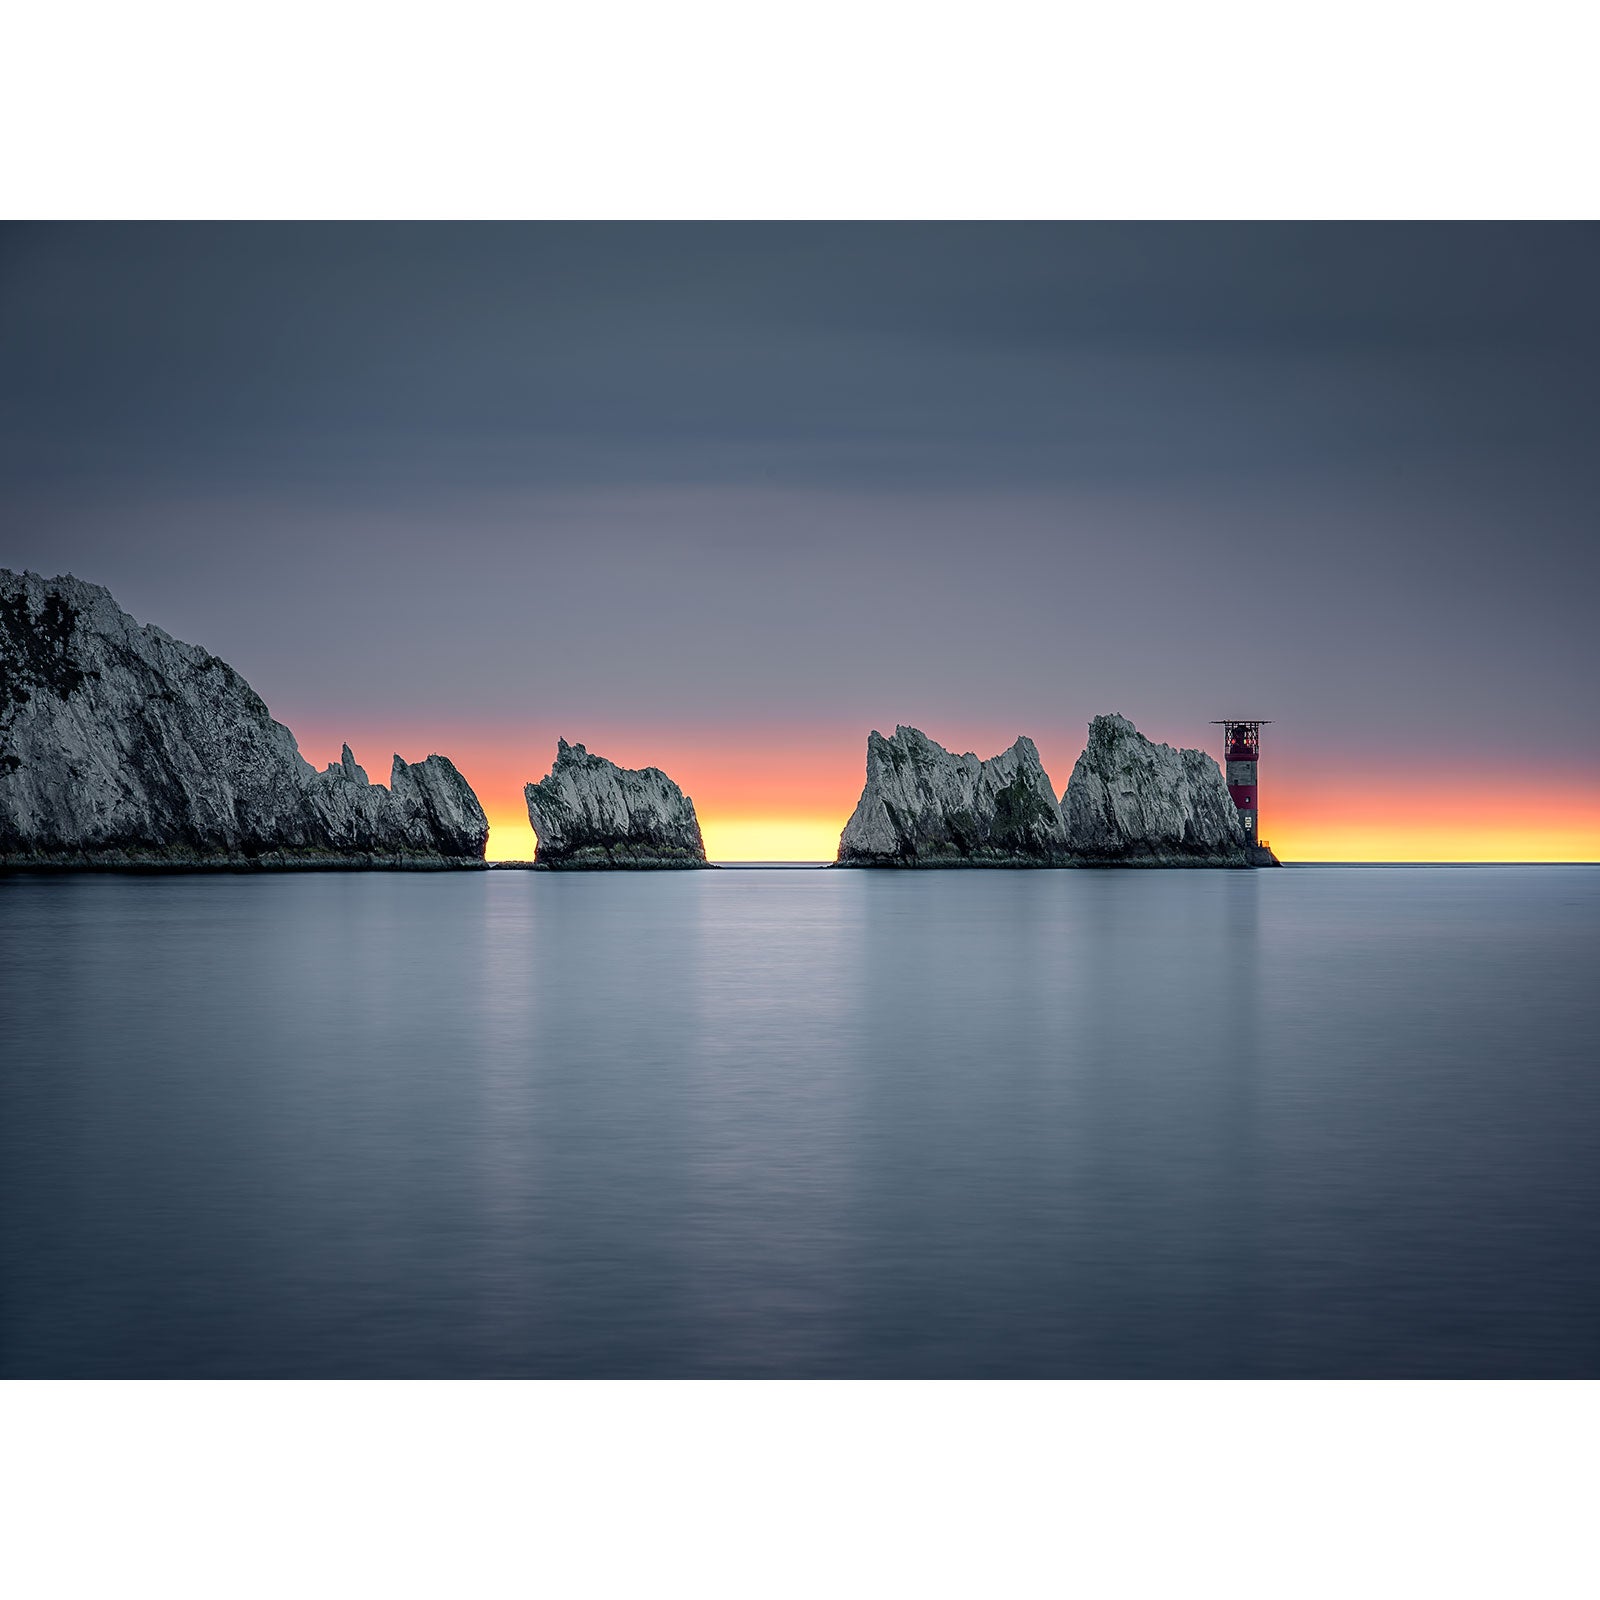 A serene seascape at dusk featuring rocky outcrops and a distant lighthouse on the Isle of Wight captured by The Needles from Available Light Photography.